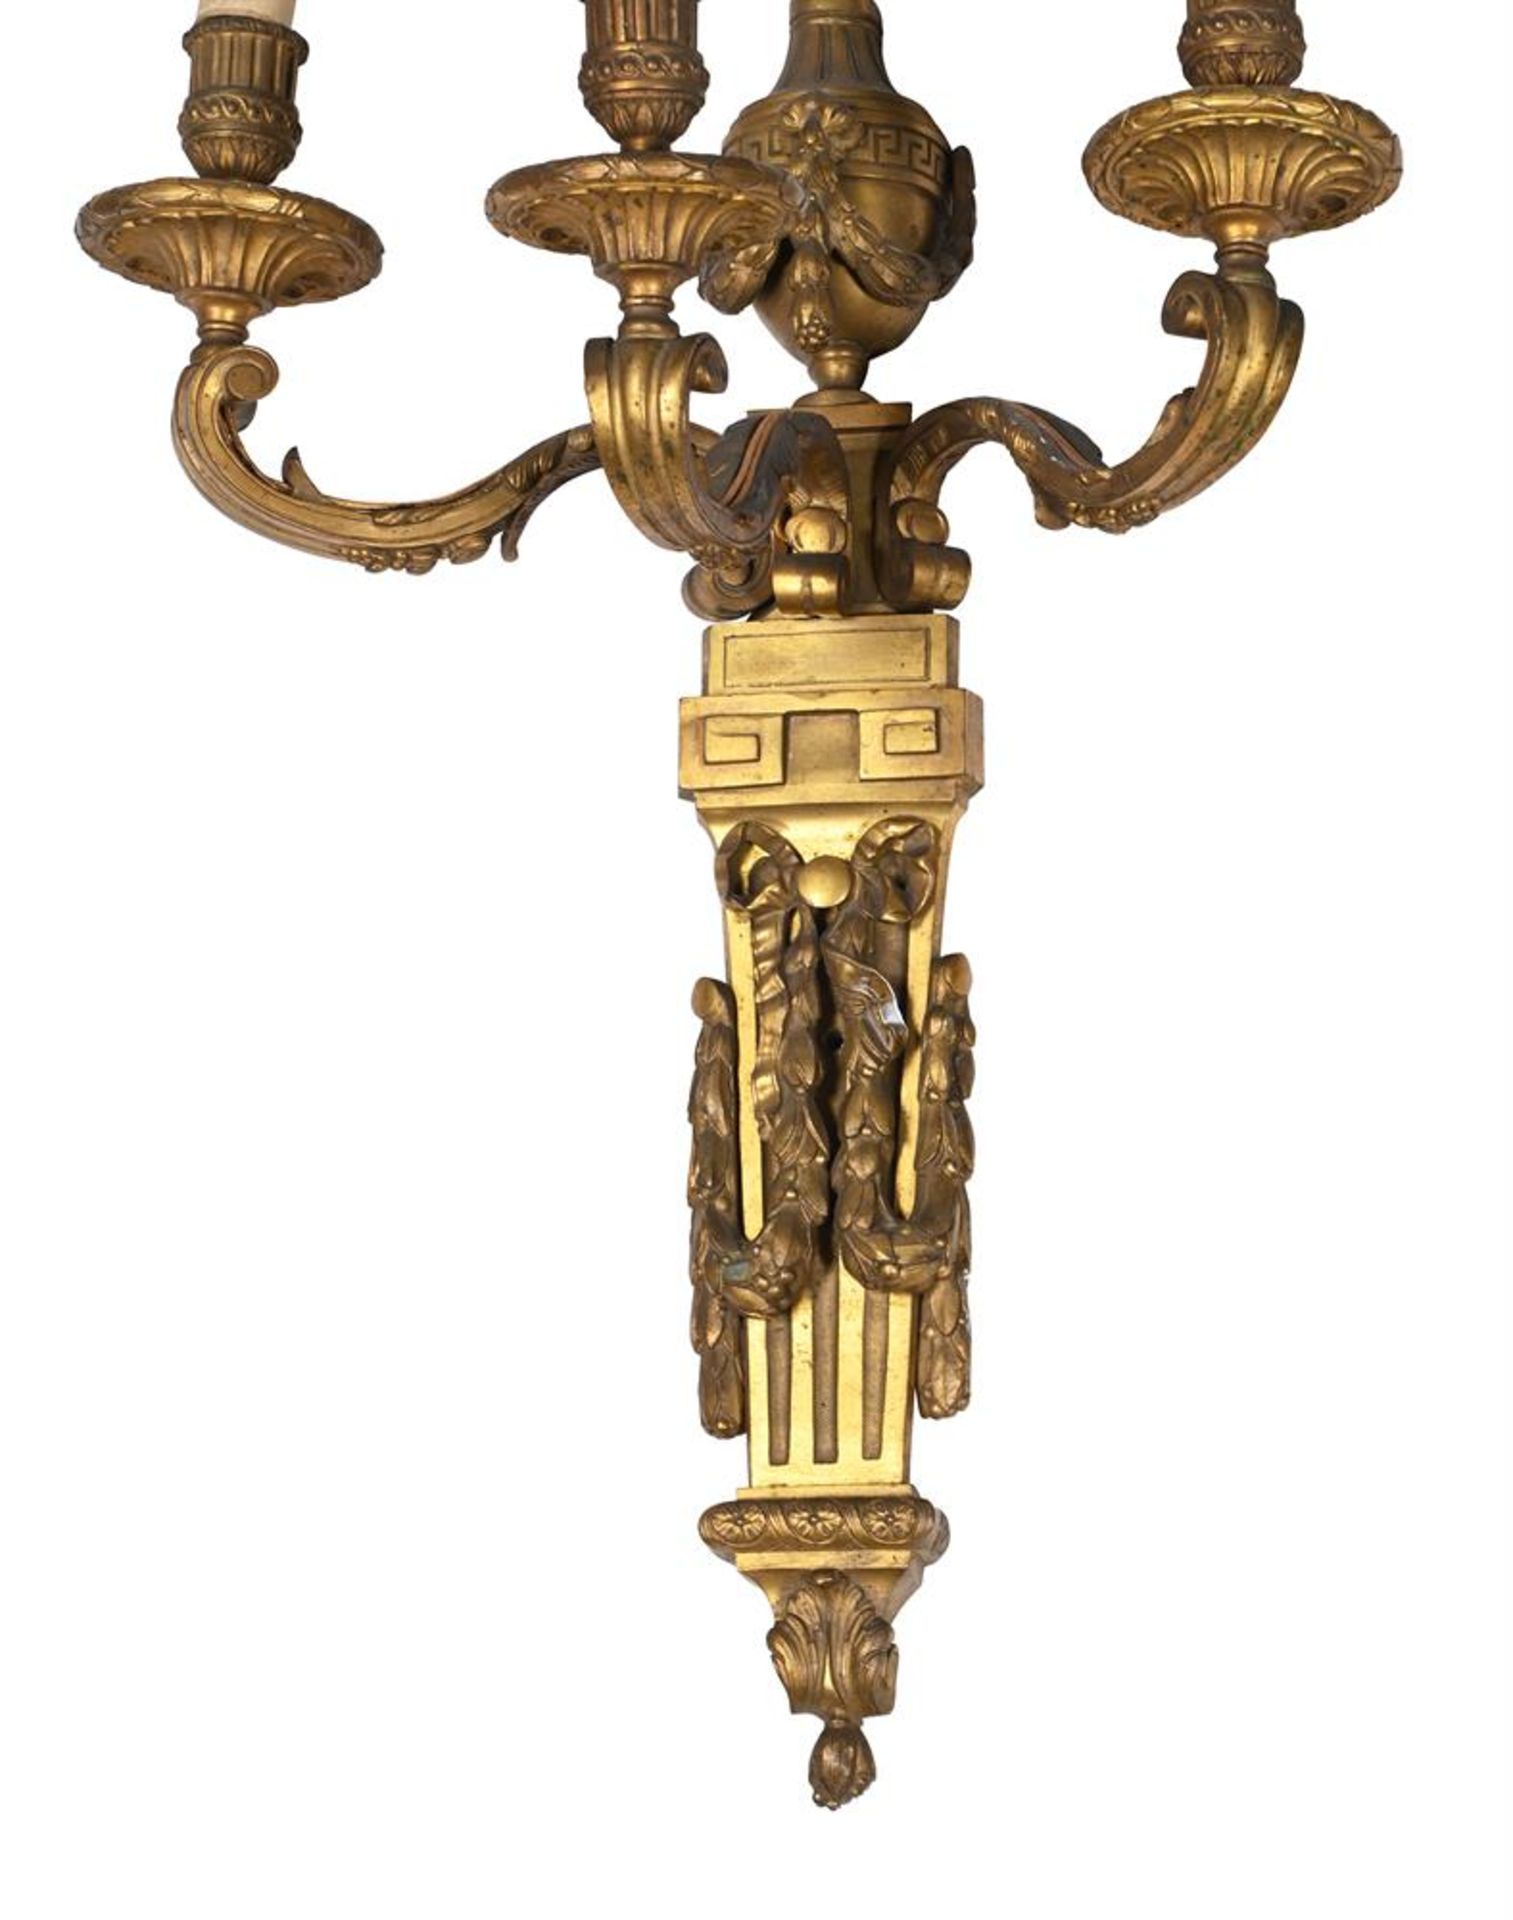 A PAIR OF FRENCH GILT BRONZE THREE BRANCH WALL LIGHTS, LATE 19TH CENTURY - Image 3 of 3